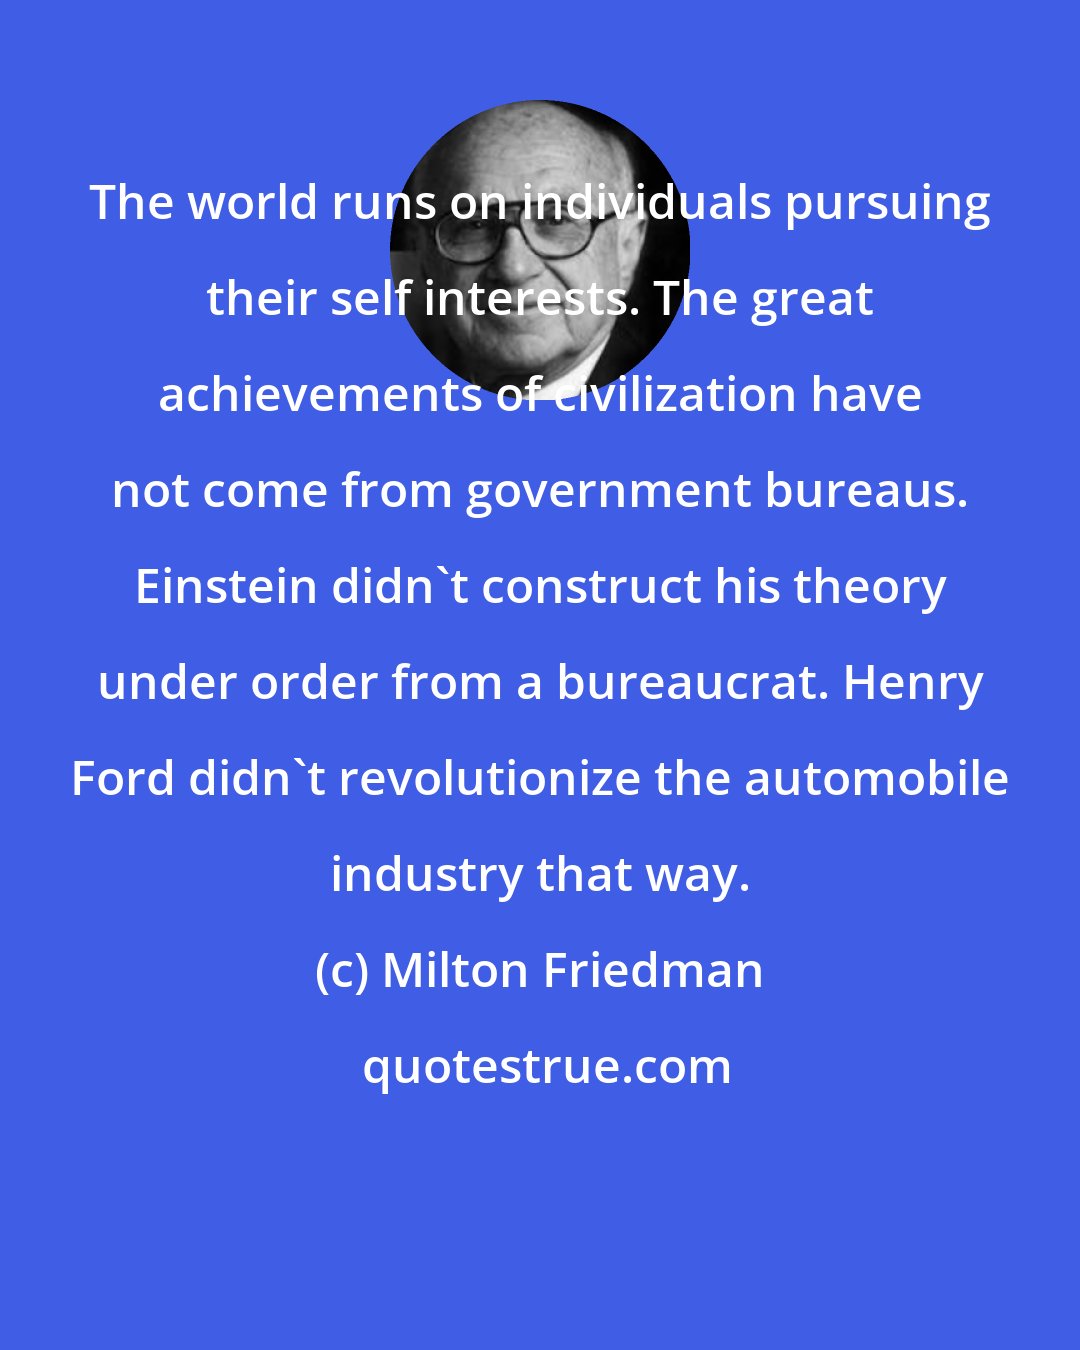 Milton Friedman: The world runs on individuals pursuing their self interests. The great achievements of civilization have not come from government bureaus. Einstein didn't construct his theory under order from a bureaucrat. Henry Ford didn't revolutionize the automobile industry that way.